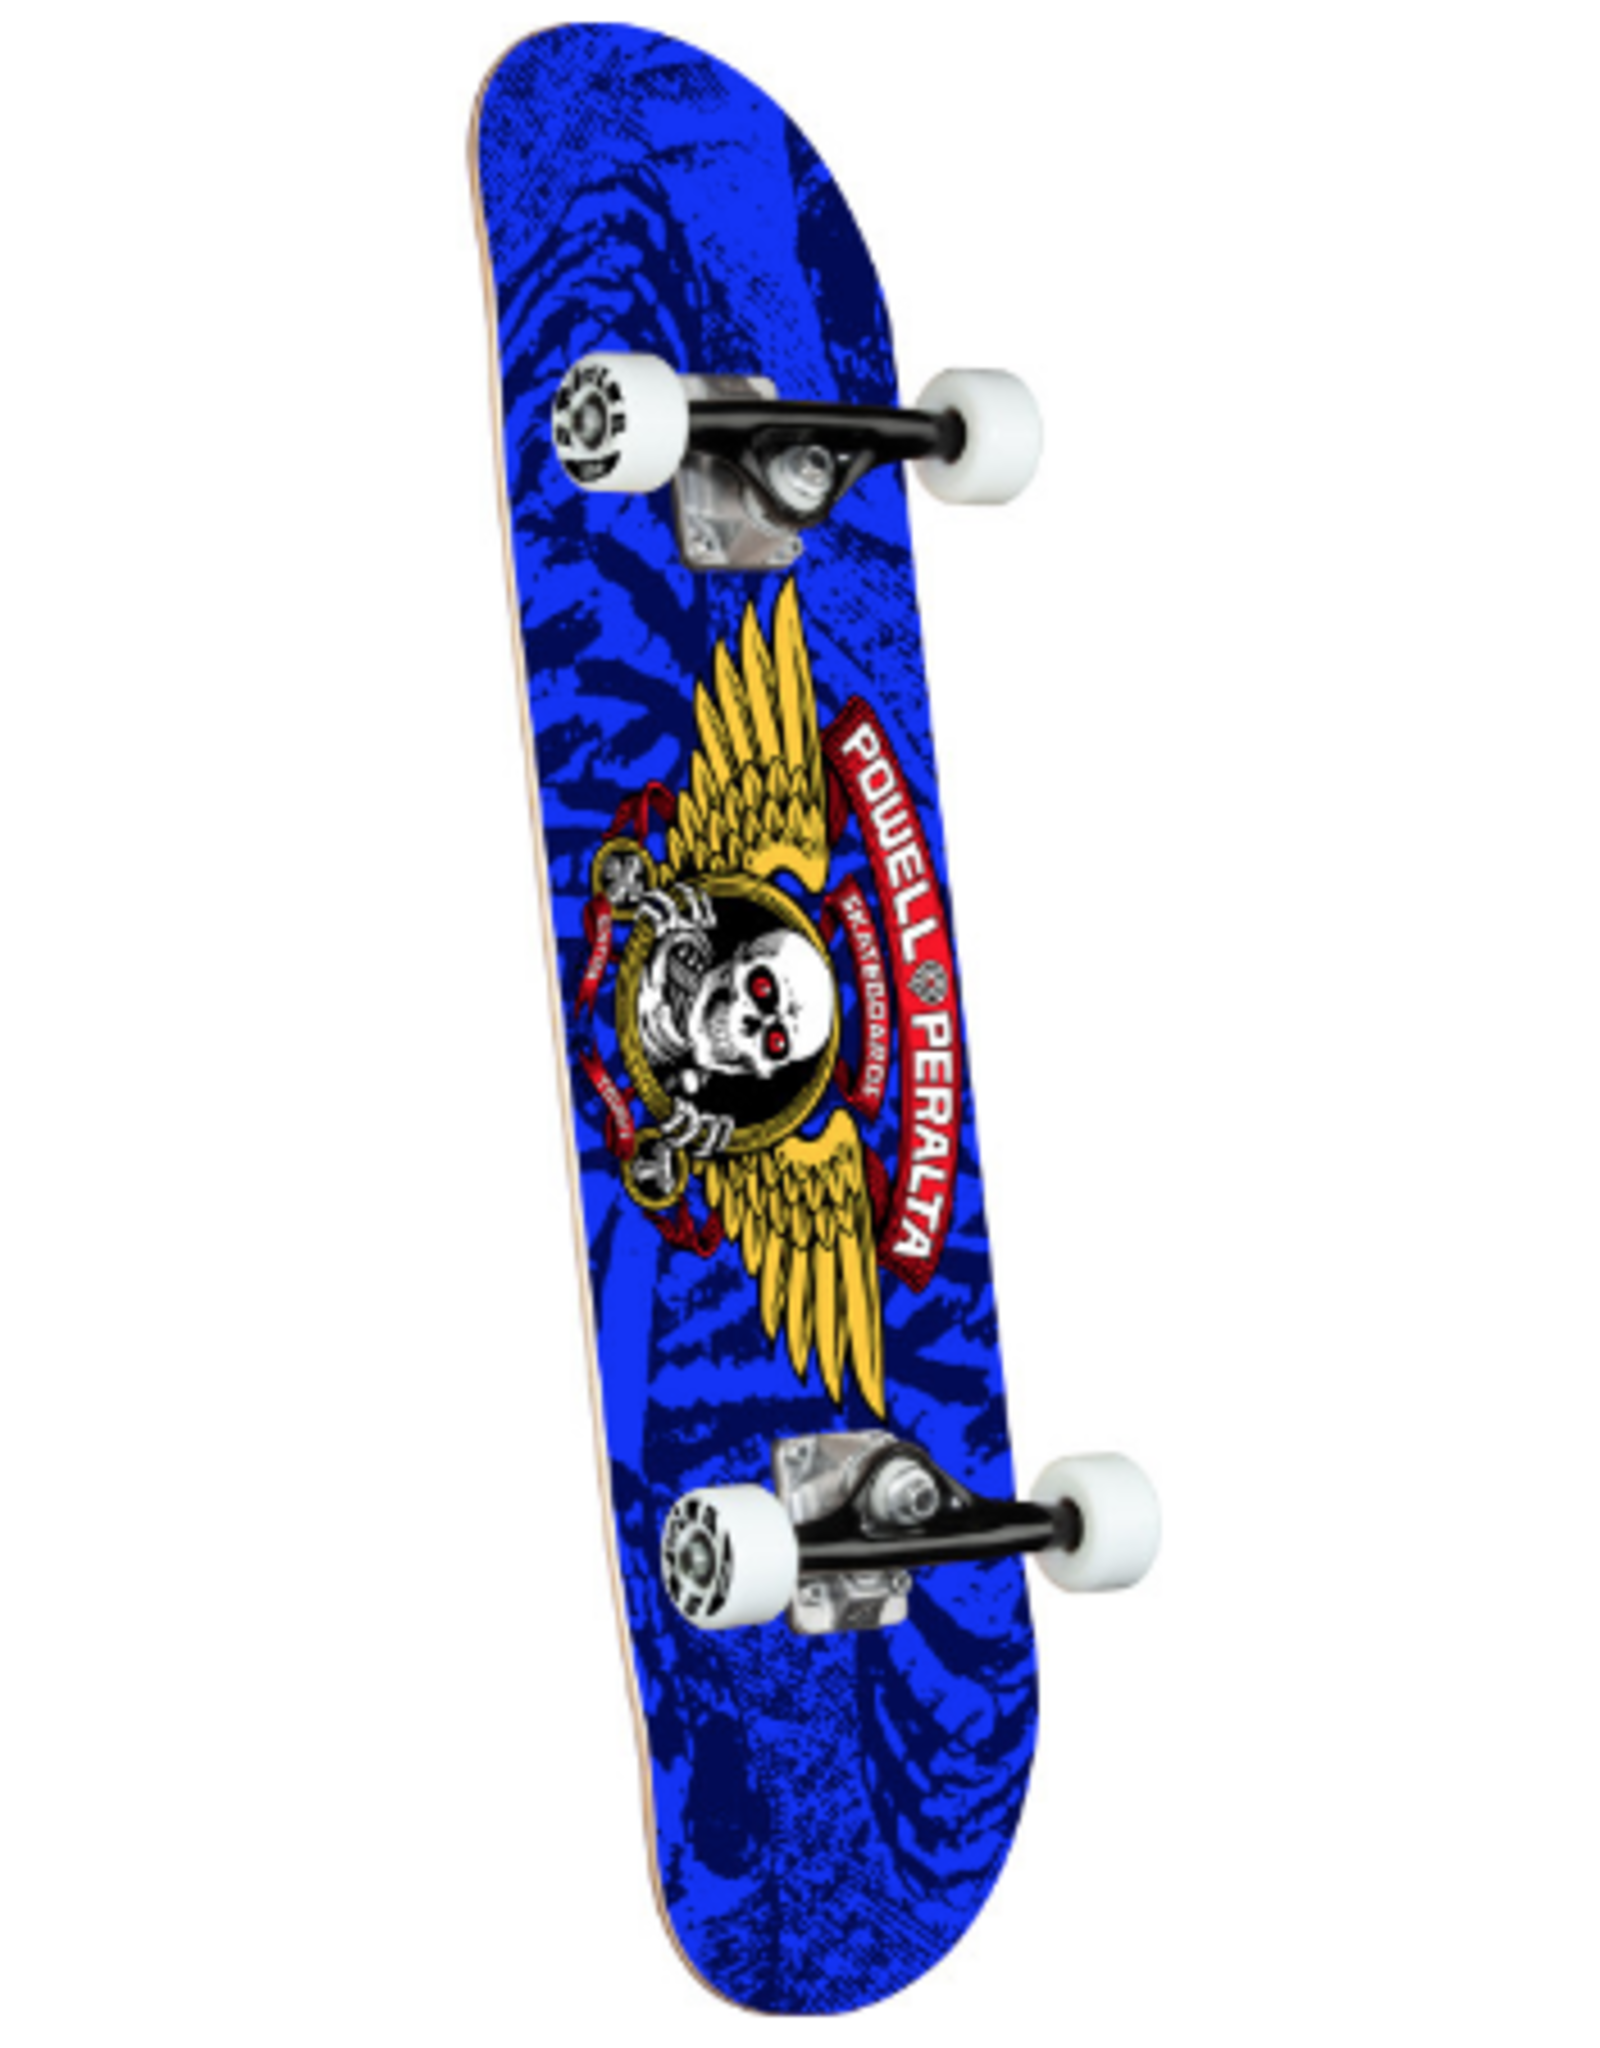 POWELL PERALTA Powell Peralta Winged Ripper One Off Royal Blue Birch Complete Skateboard - 7 x 28